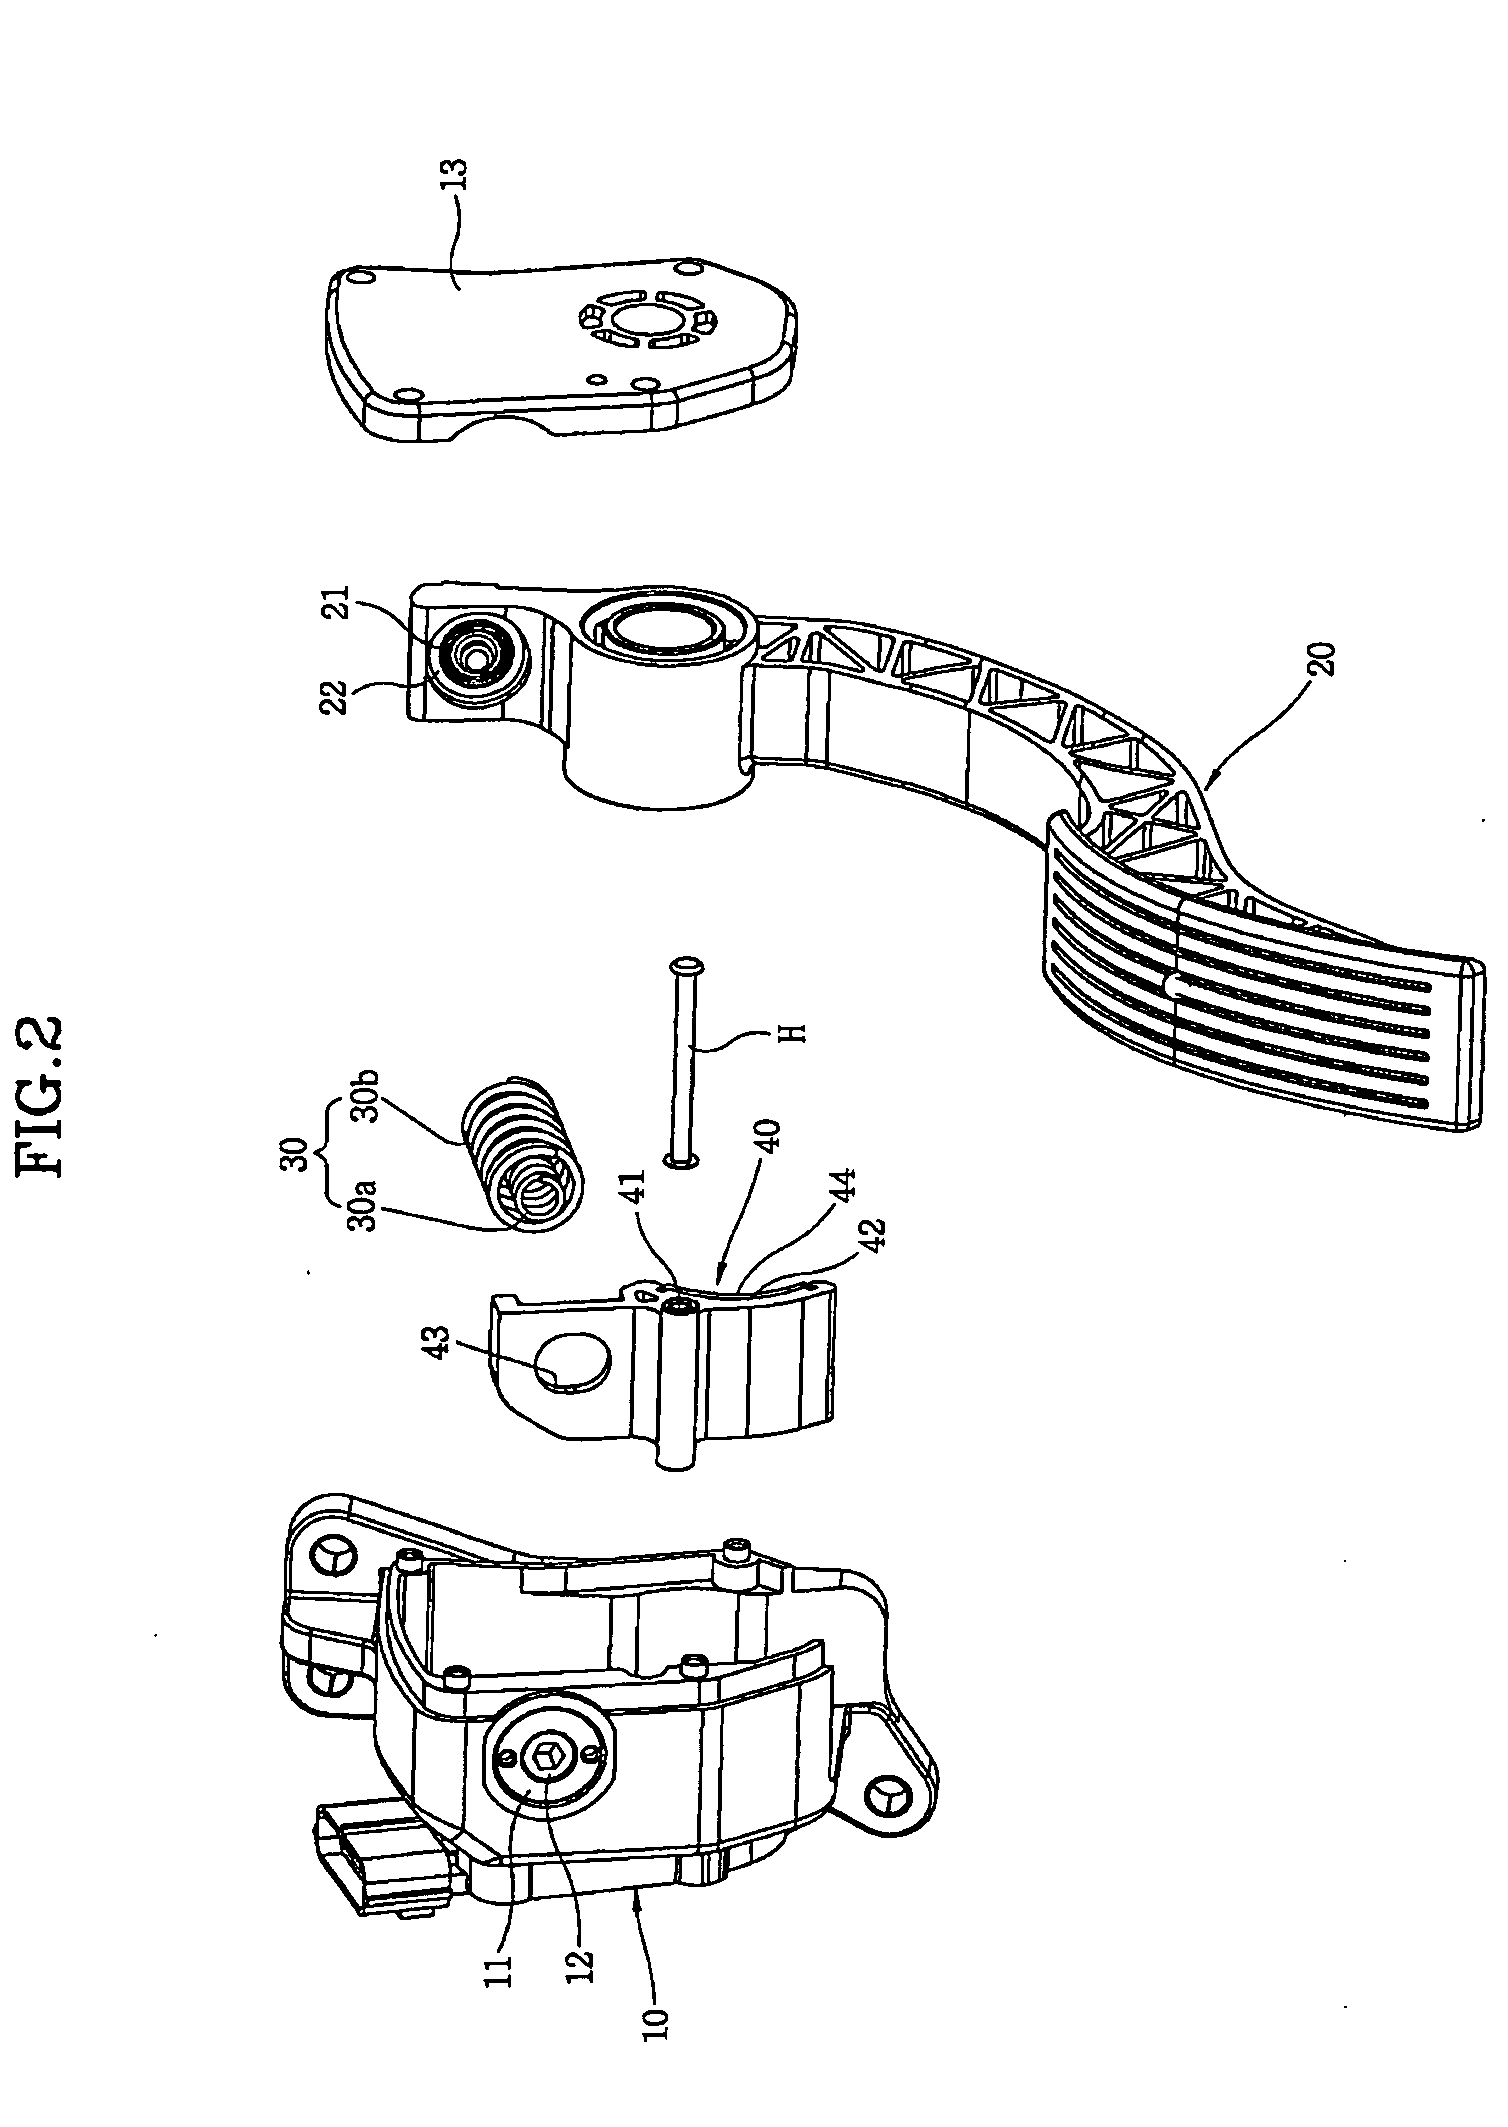 Pedal device with function of adjusting pedal effort and hysteresis